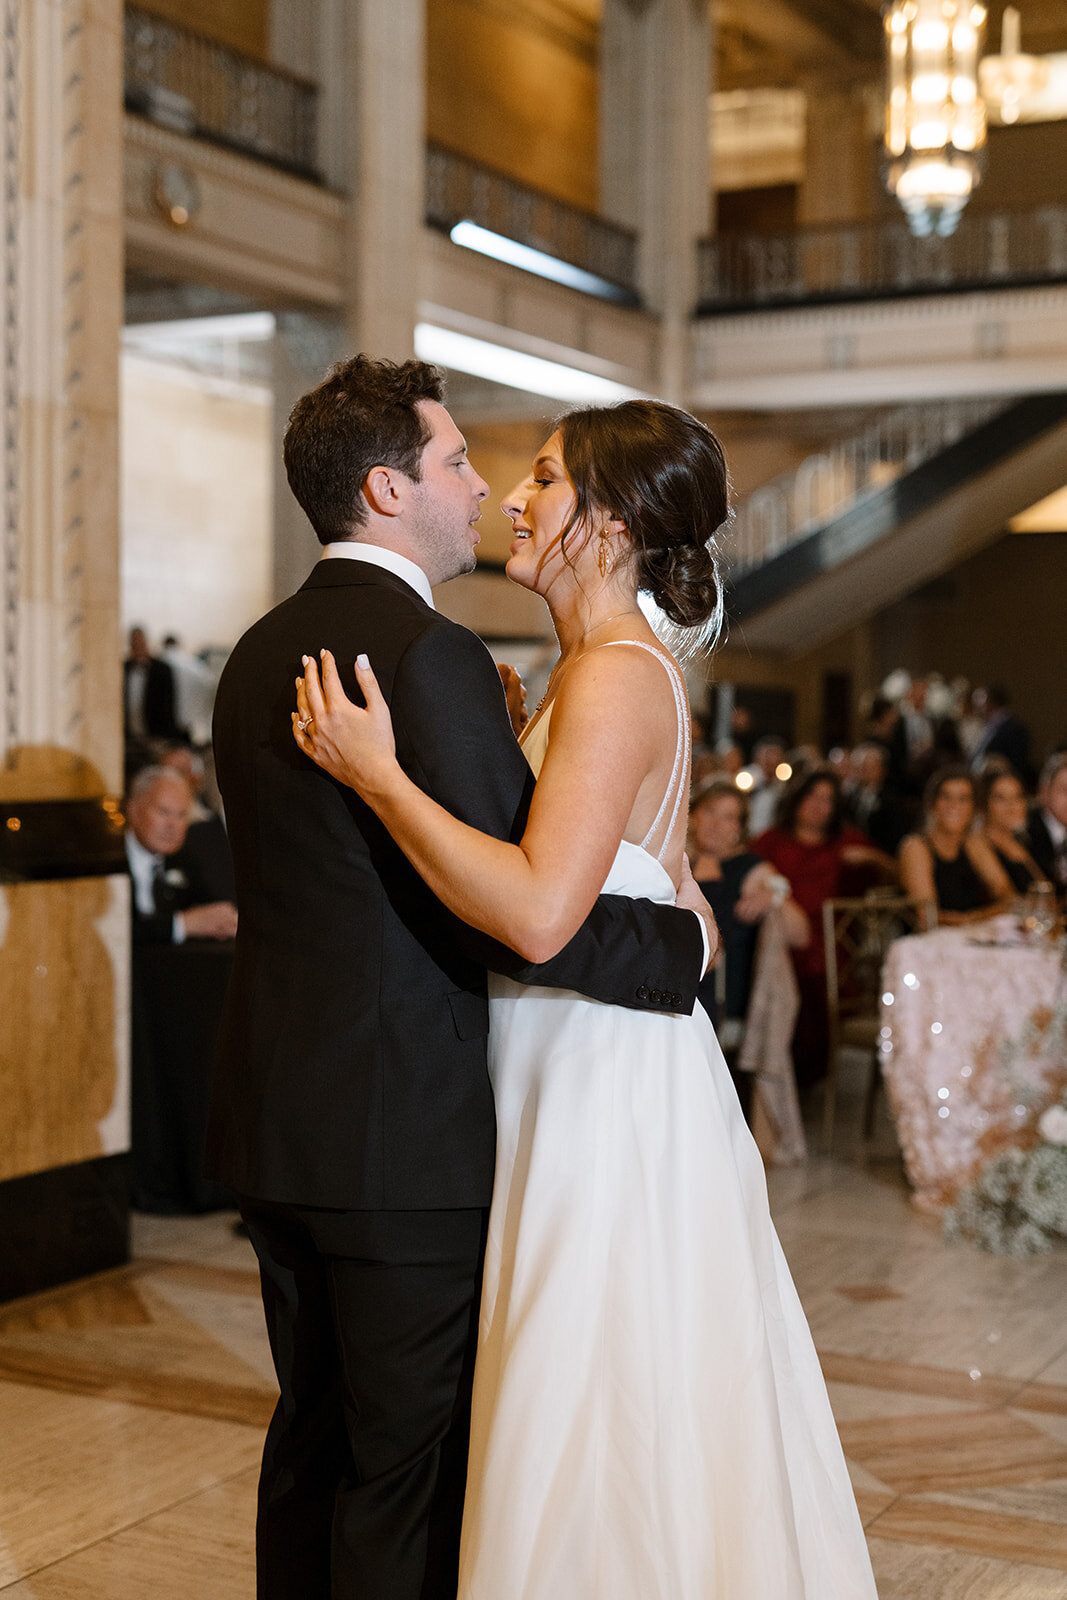 Kylie and Jack at The Grand Hall - Kansas City Wedding Photograpy - Nick and Lexie Photo Film-913